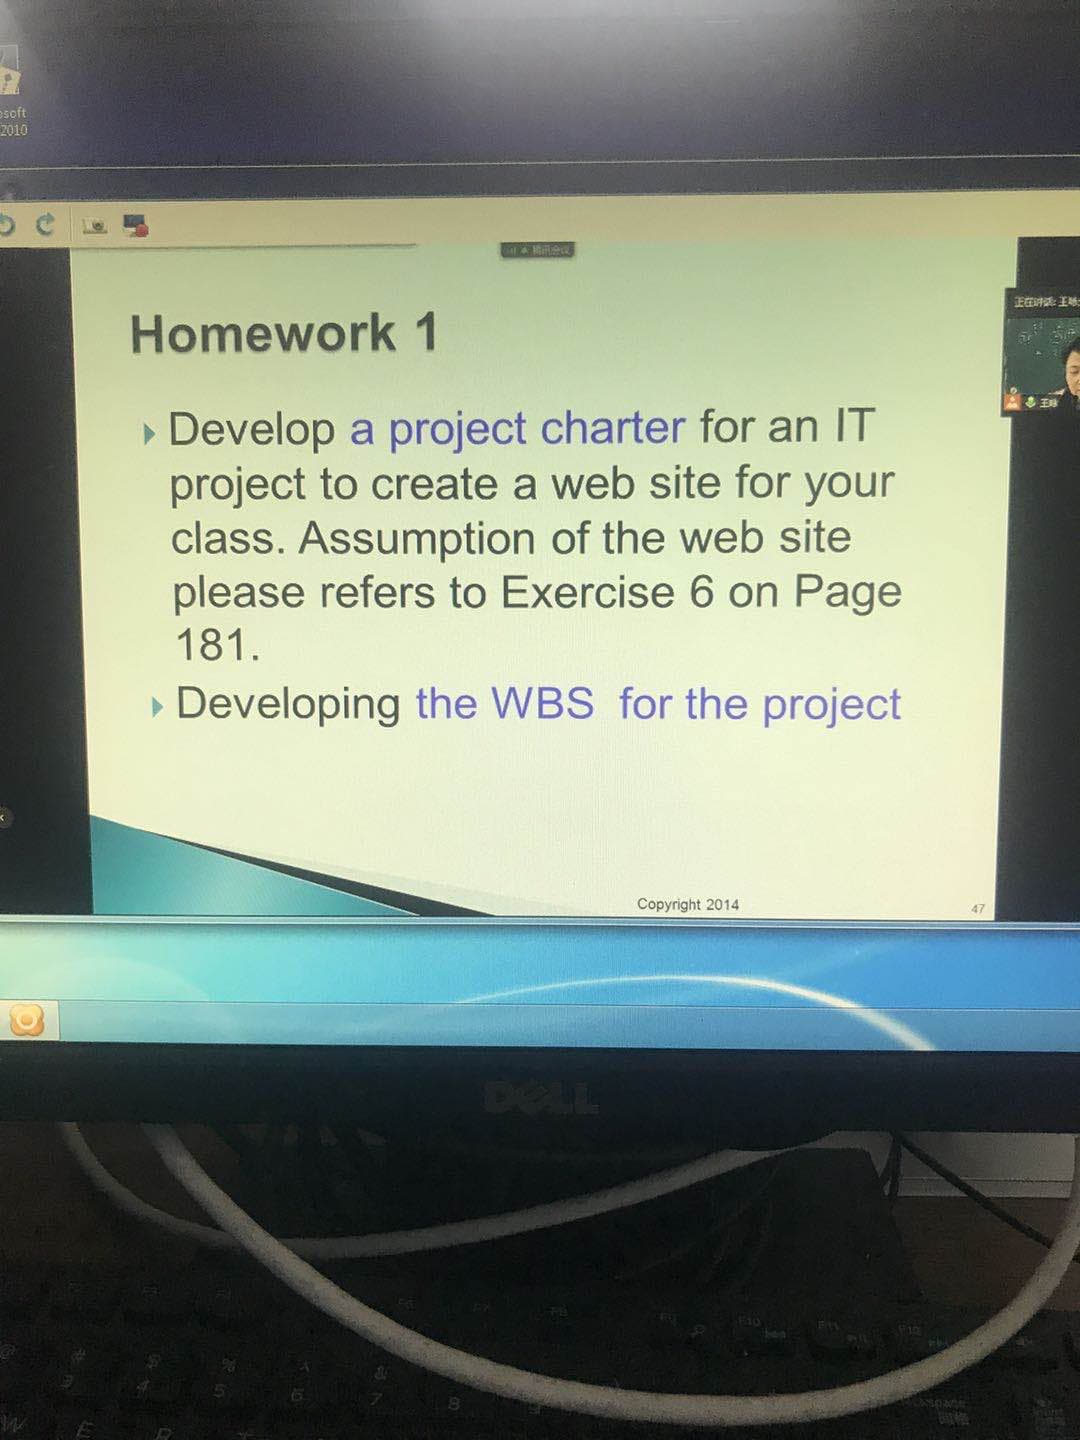 esoft
2010
Homework 1
» Develop a project charter for an IT
project to create a web site for your
class. Assumption of the web site
please refers to Exercise 6 on Page
181.
» Developing the WBS for the project
Copyright 2014
47
